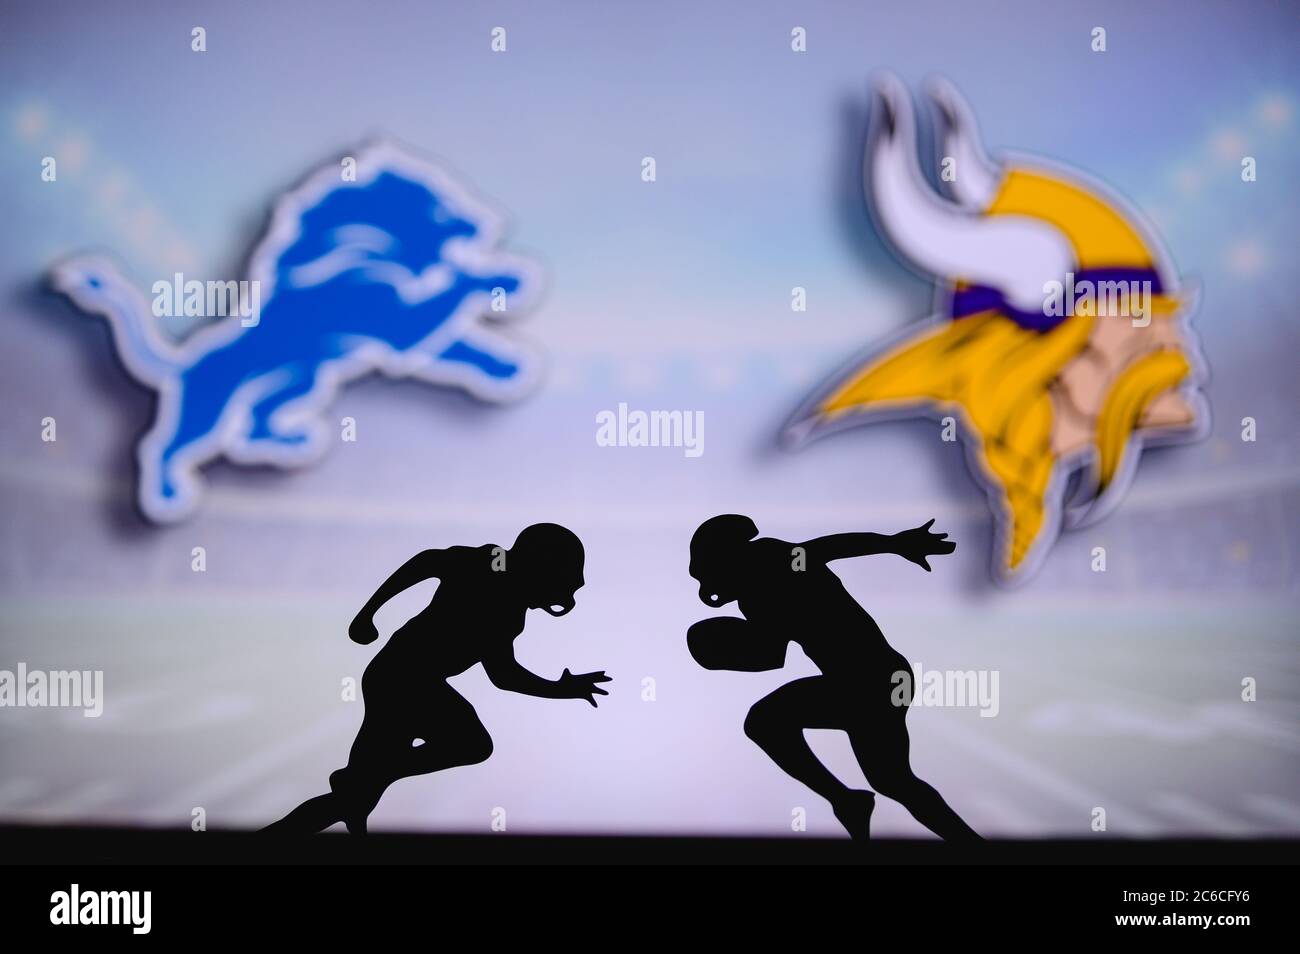 Detroit Lions vs.Minnesota Vikings . NFL match poster. Two american football players silhouette facing each other on the field. Clubs logo in backgrou Stock Photo